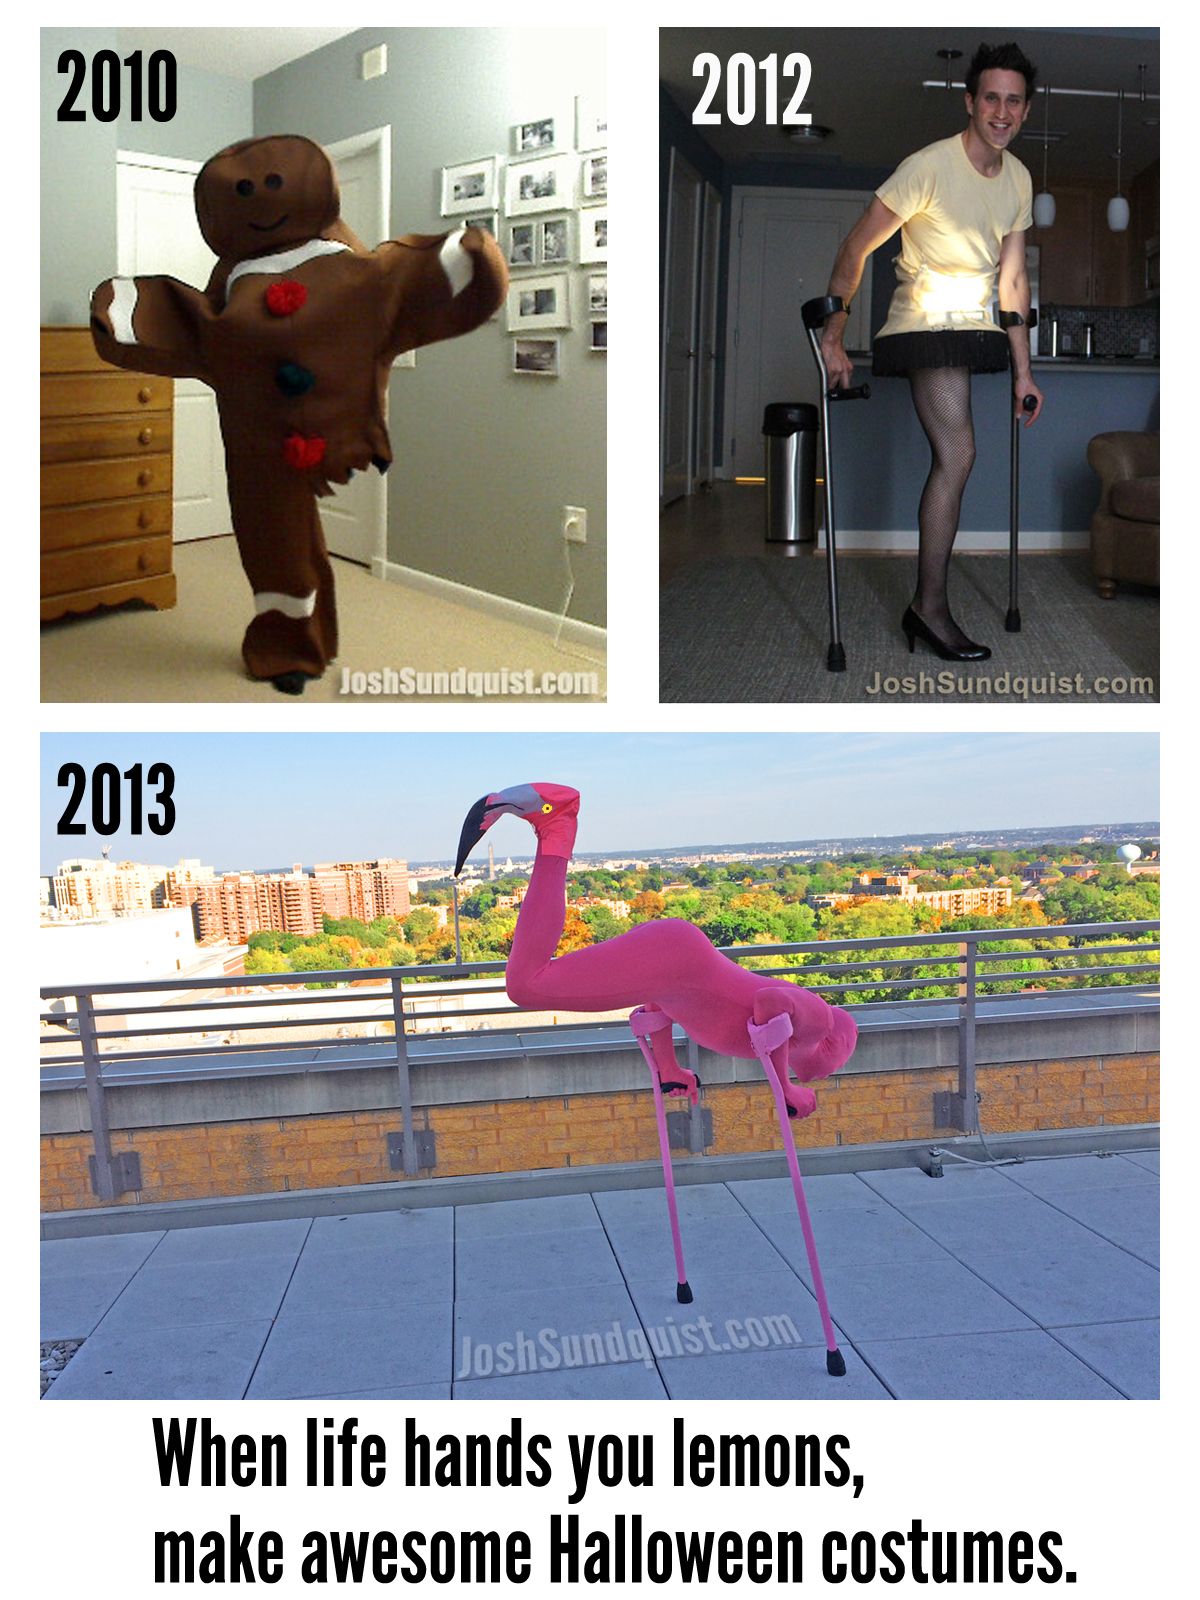 A guy who only has one leg dresses up as a gingerbread man in 2010, a light bulb in 2012, and a flamingo in 2013.